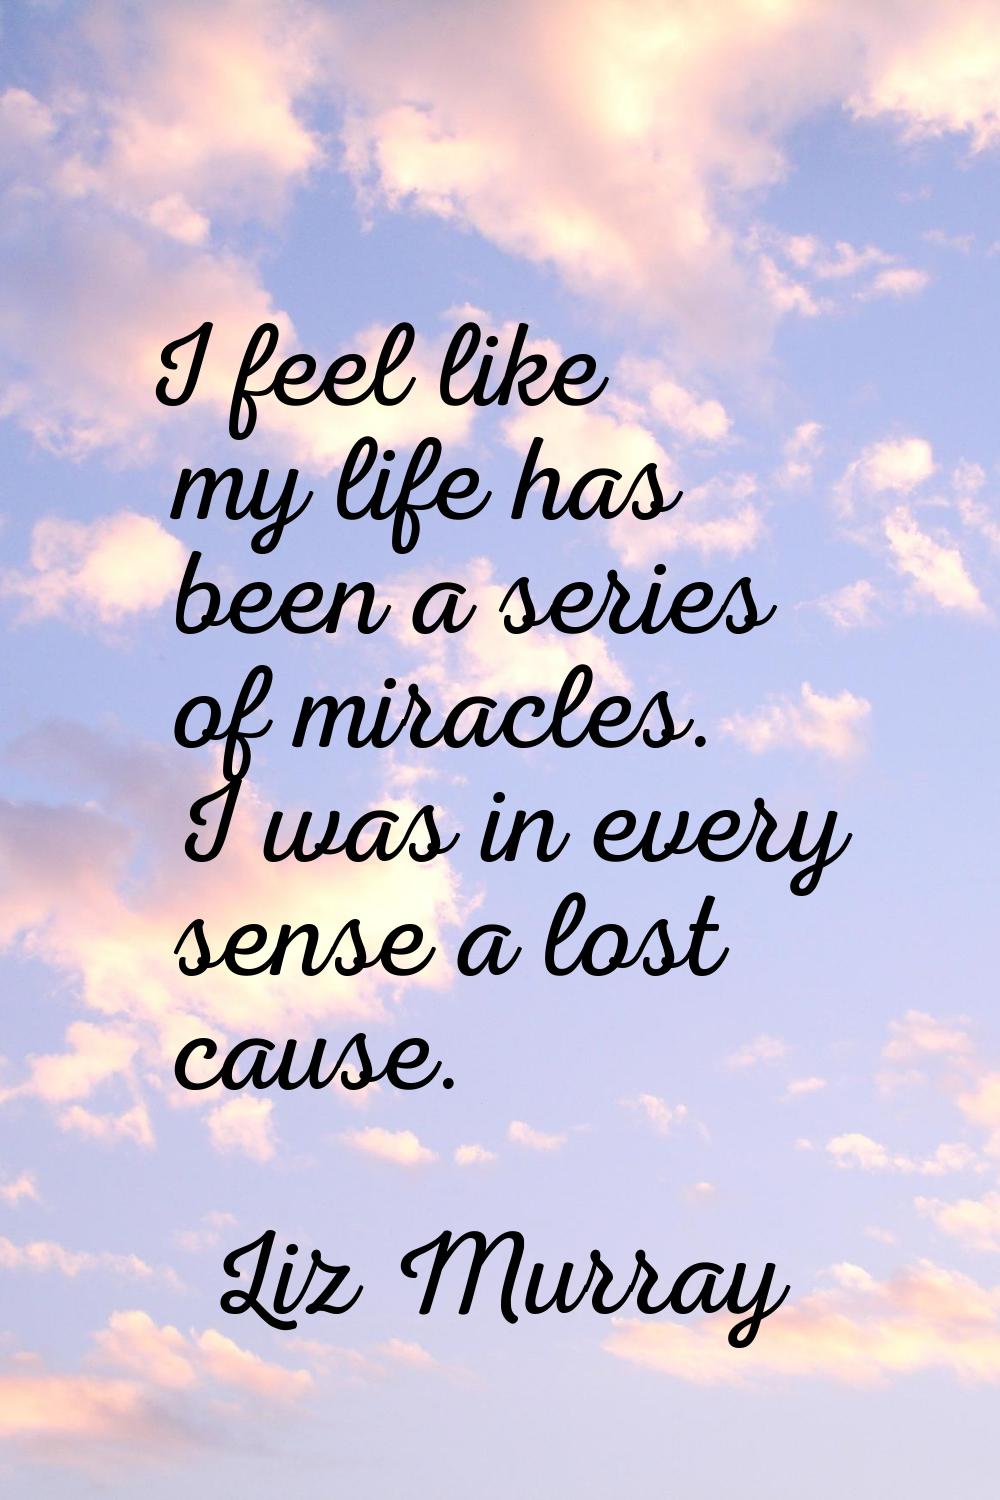 I feel like my life has been a series of miracles. I was in every sense a lost cause.